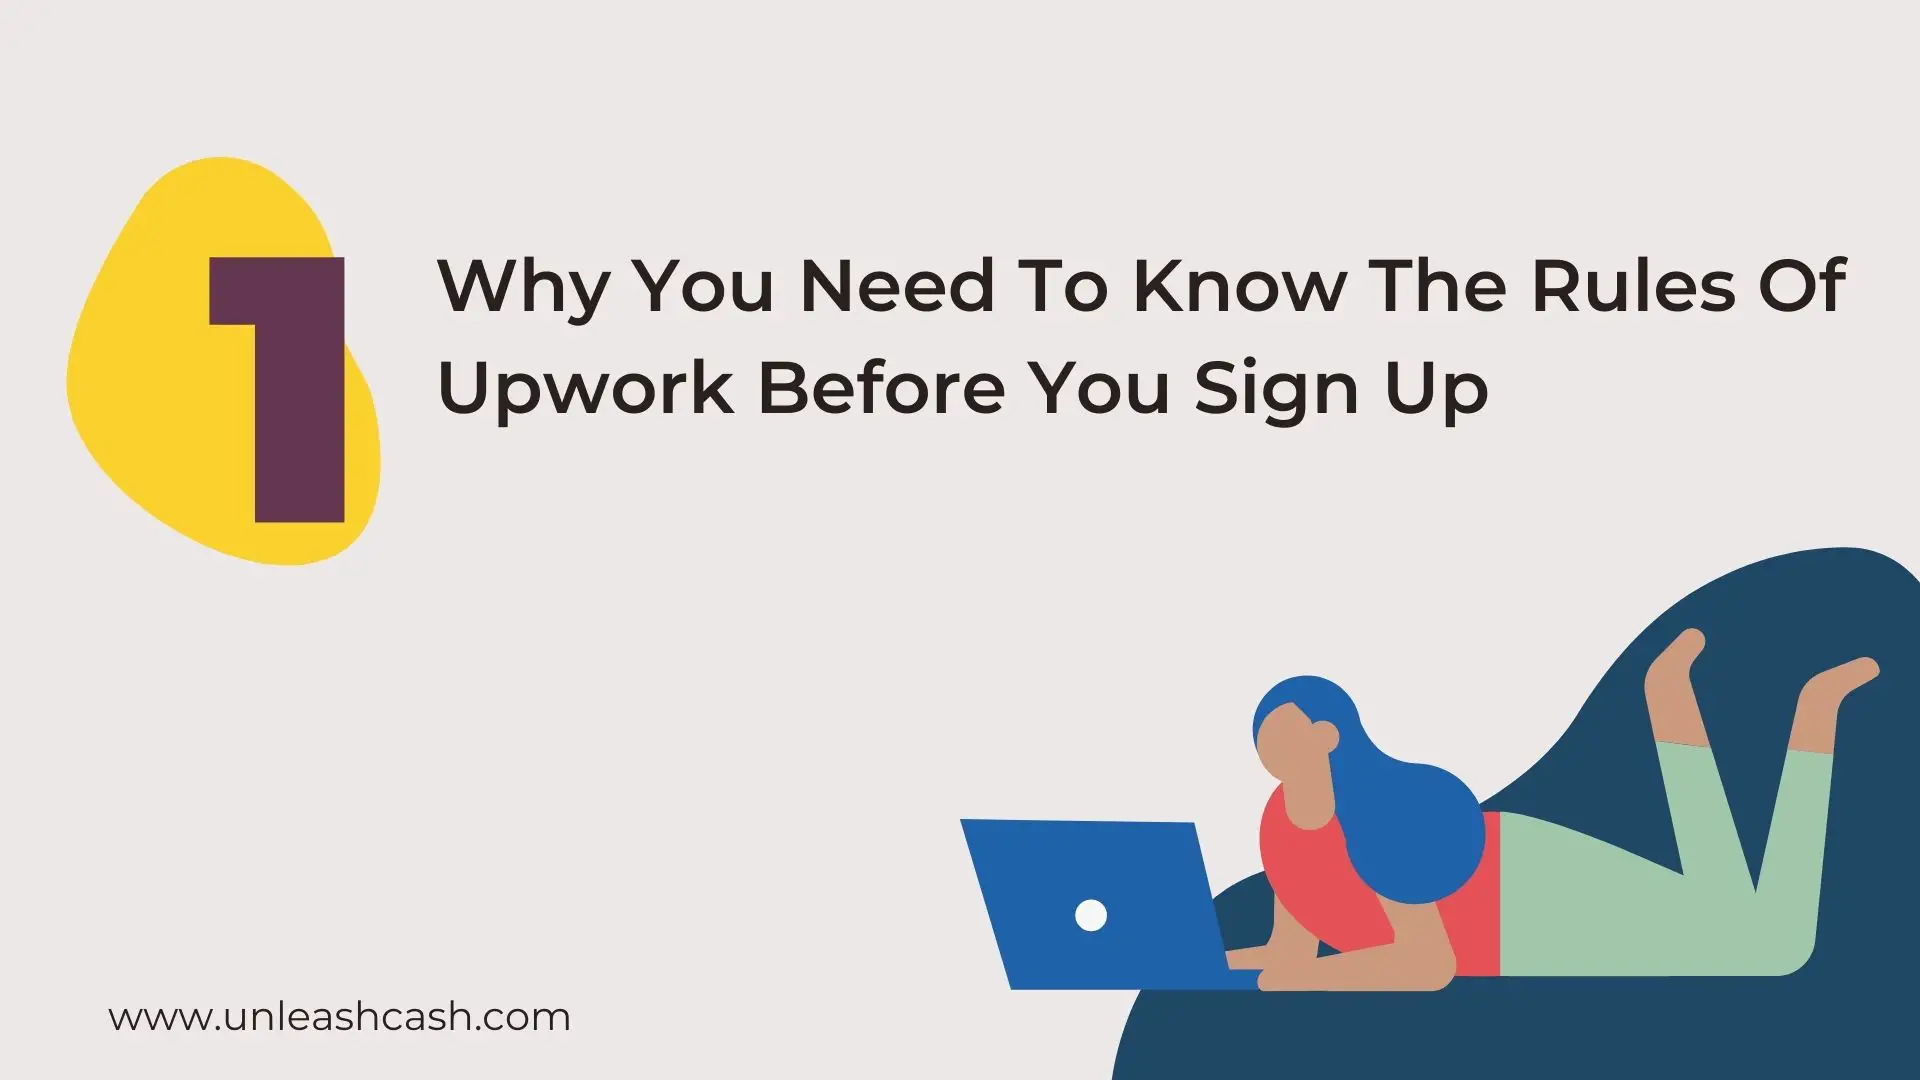 Why You Need To Know The Rules Of Upwork Before You Sign Up